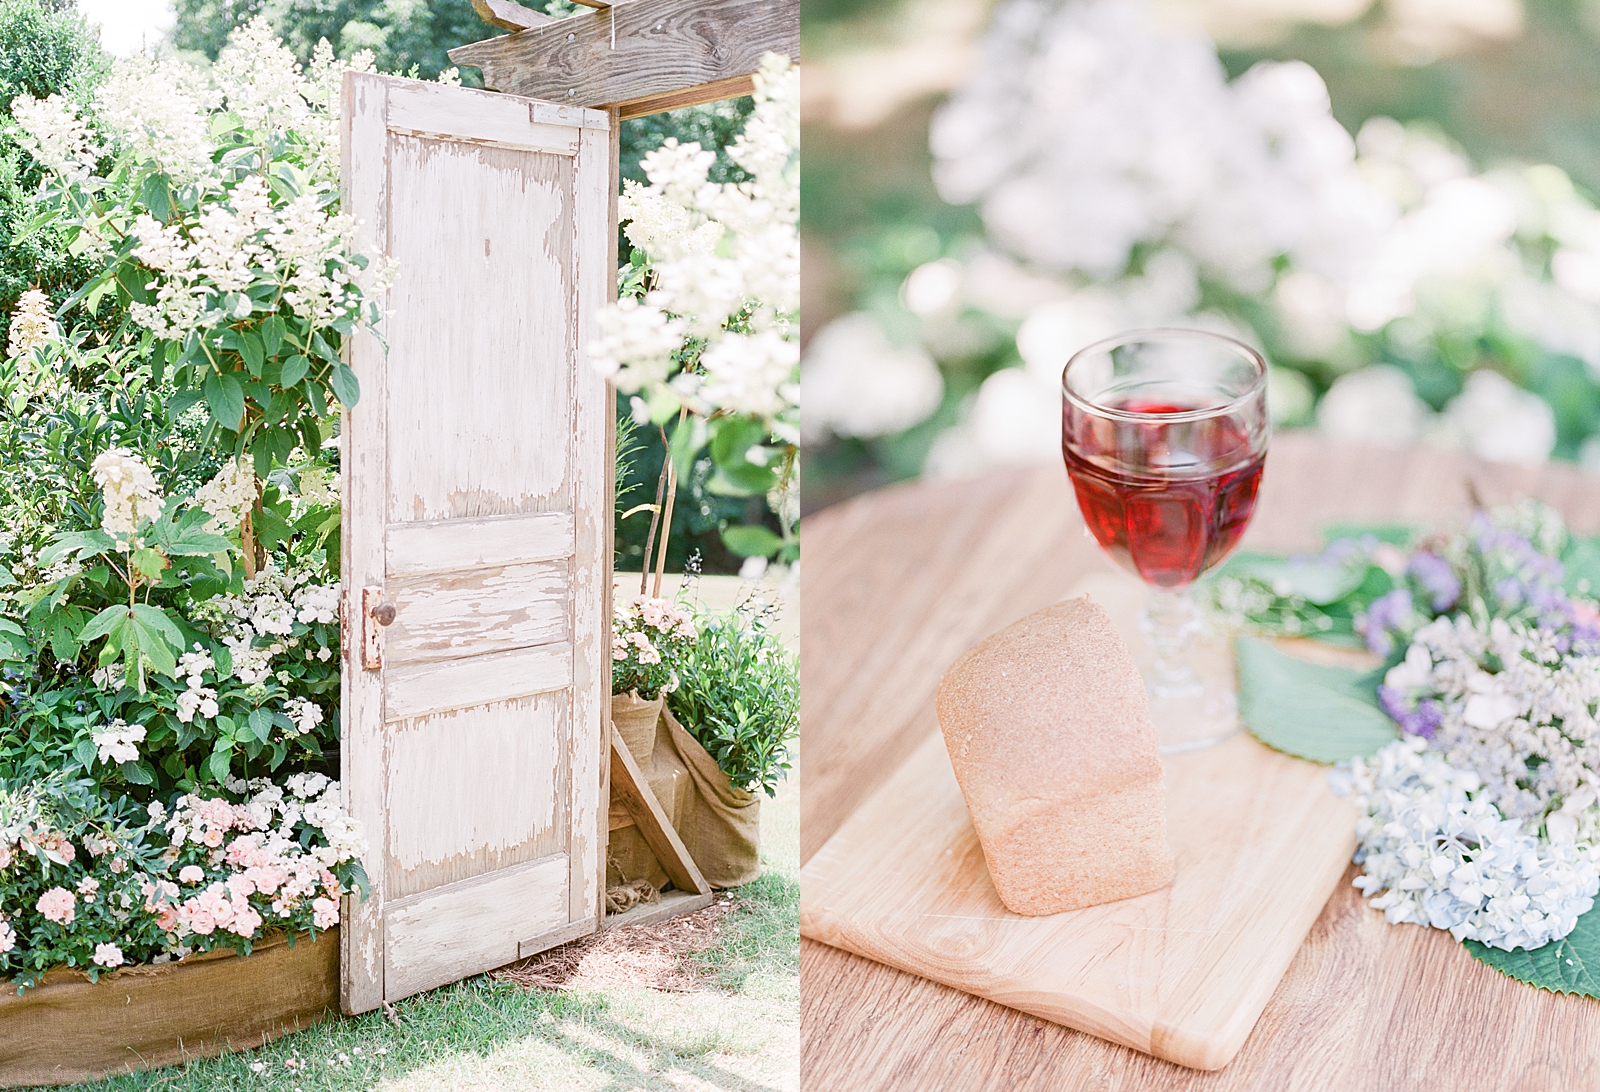 Black Fox Farms Garden Wedding Details Old Door and Wine and Bread For Communion Photos